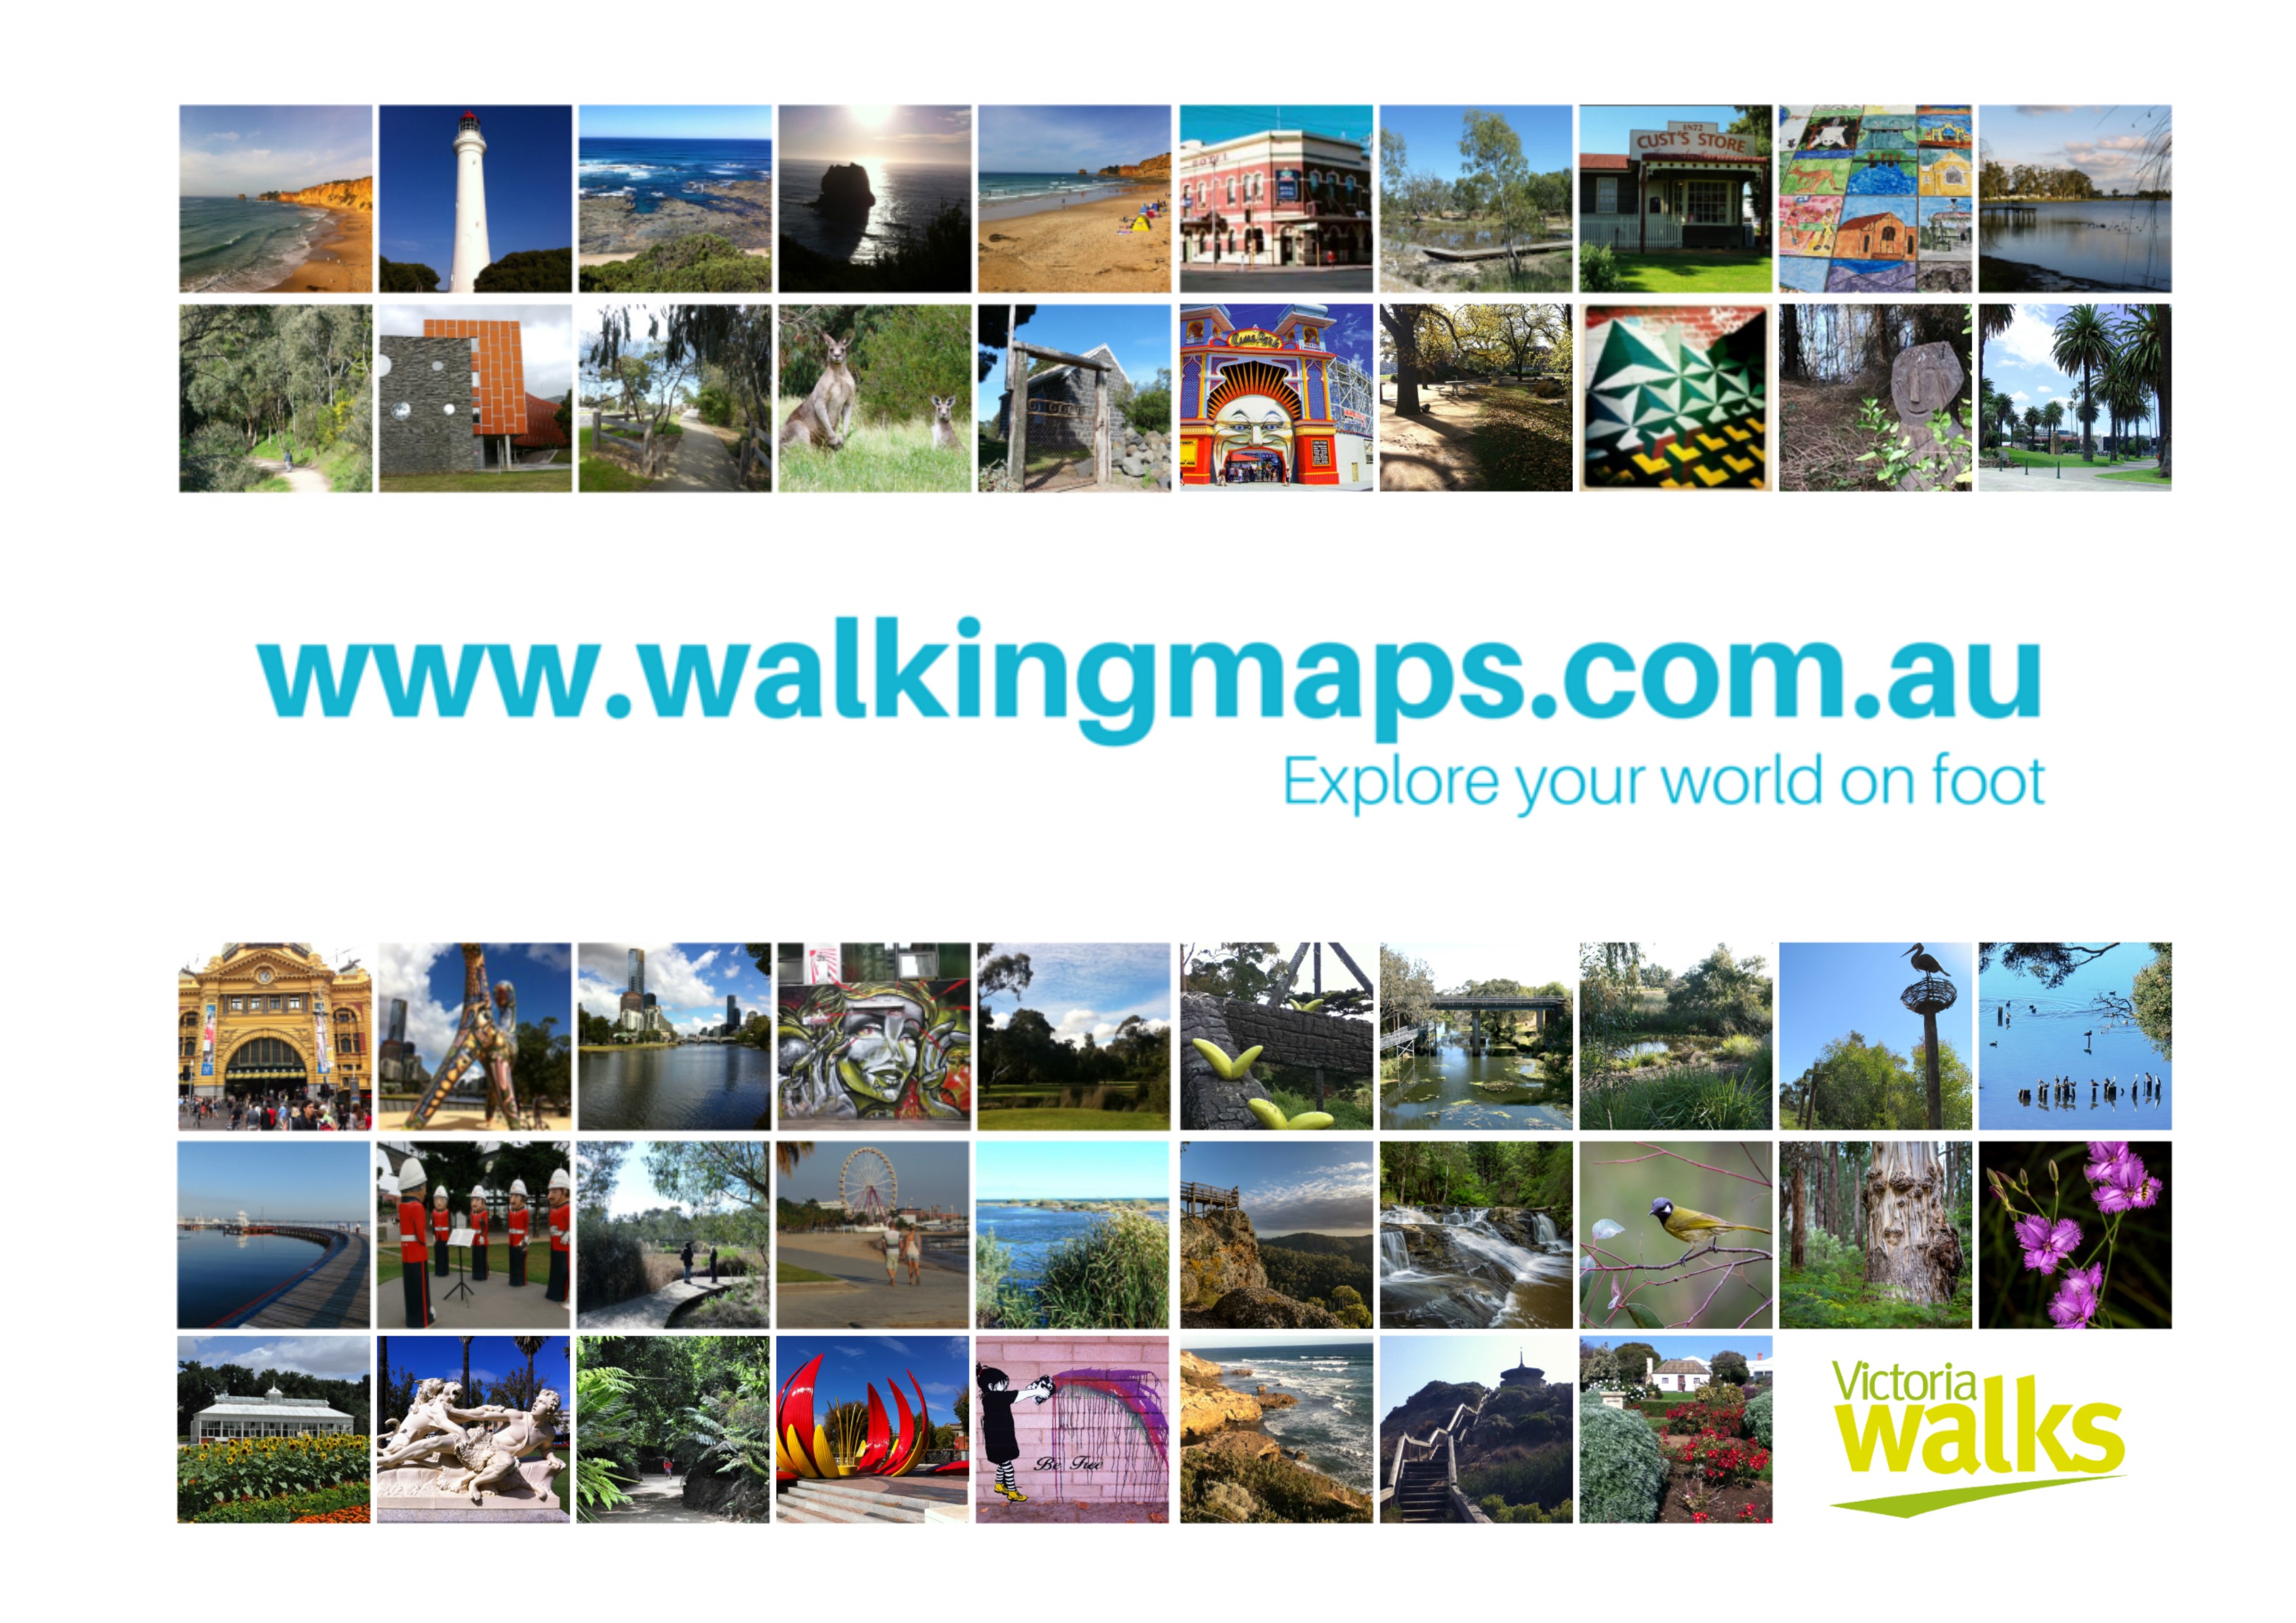 Find out about the Walking Maps website